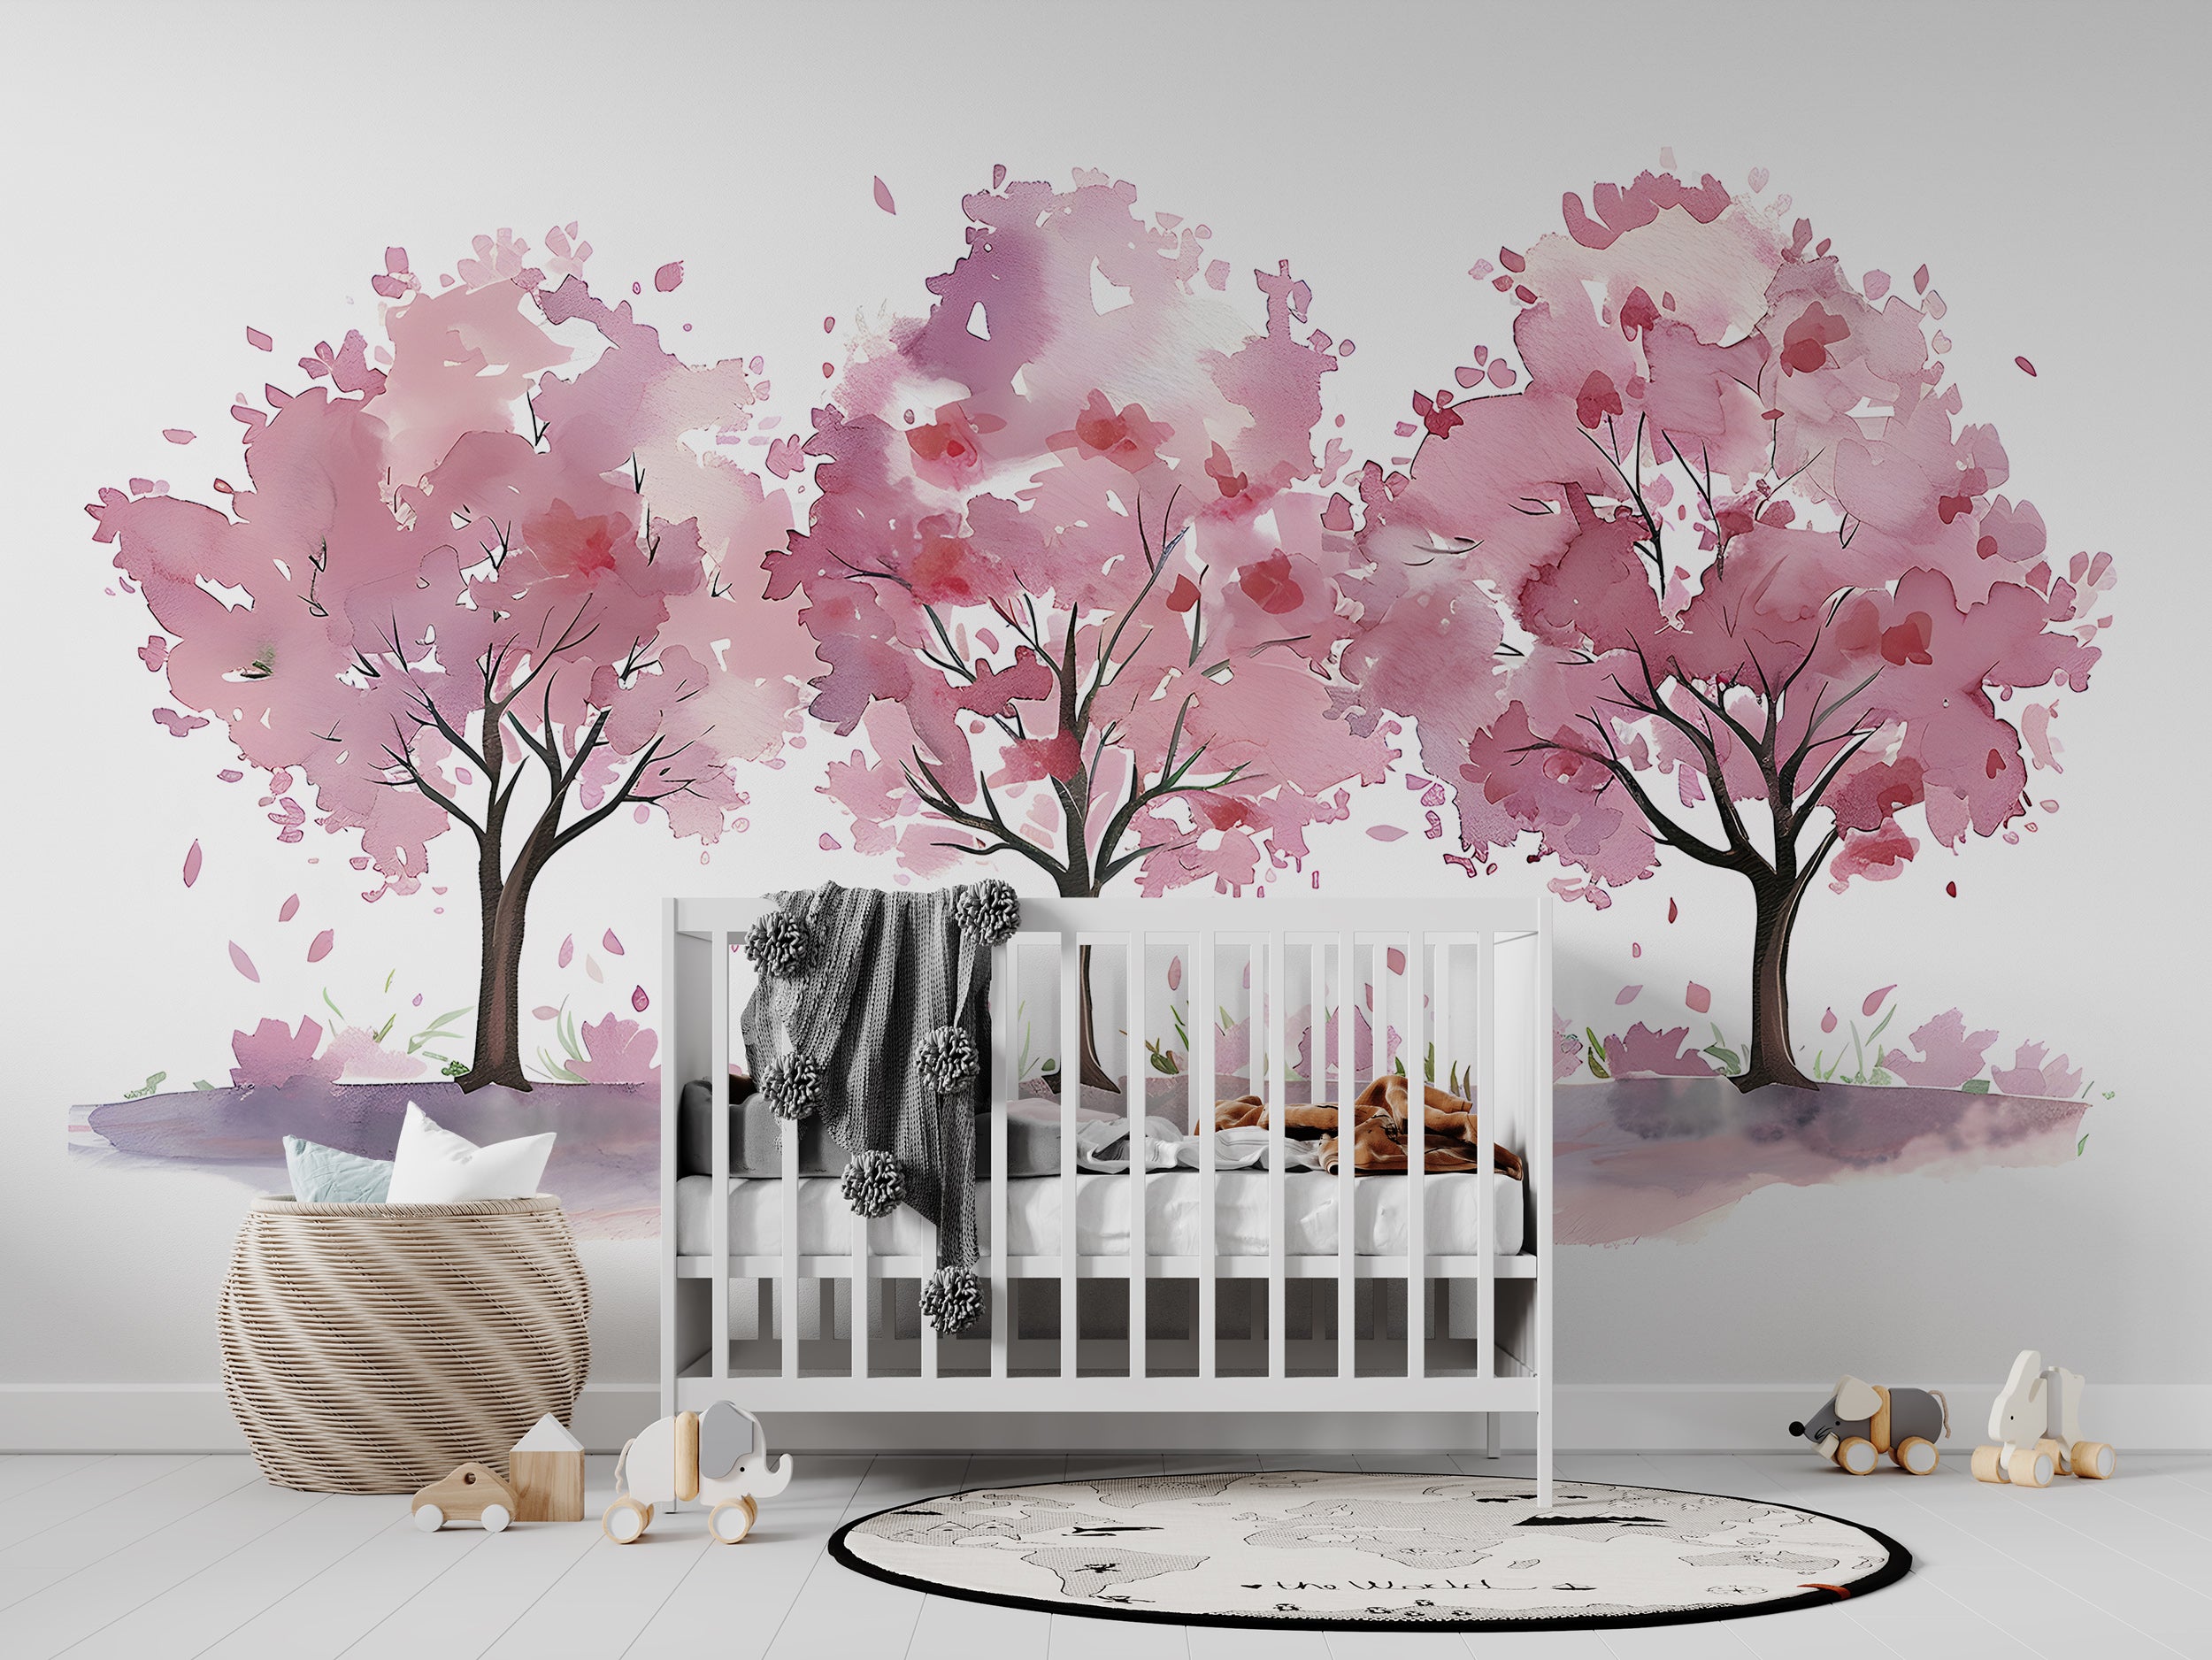 Nursery Pink Trees Mural, Watercolor Three Trees Wallpaper, Peel and Stick Custom Size Removable Kids Wall Decal, PVC-free